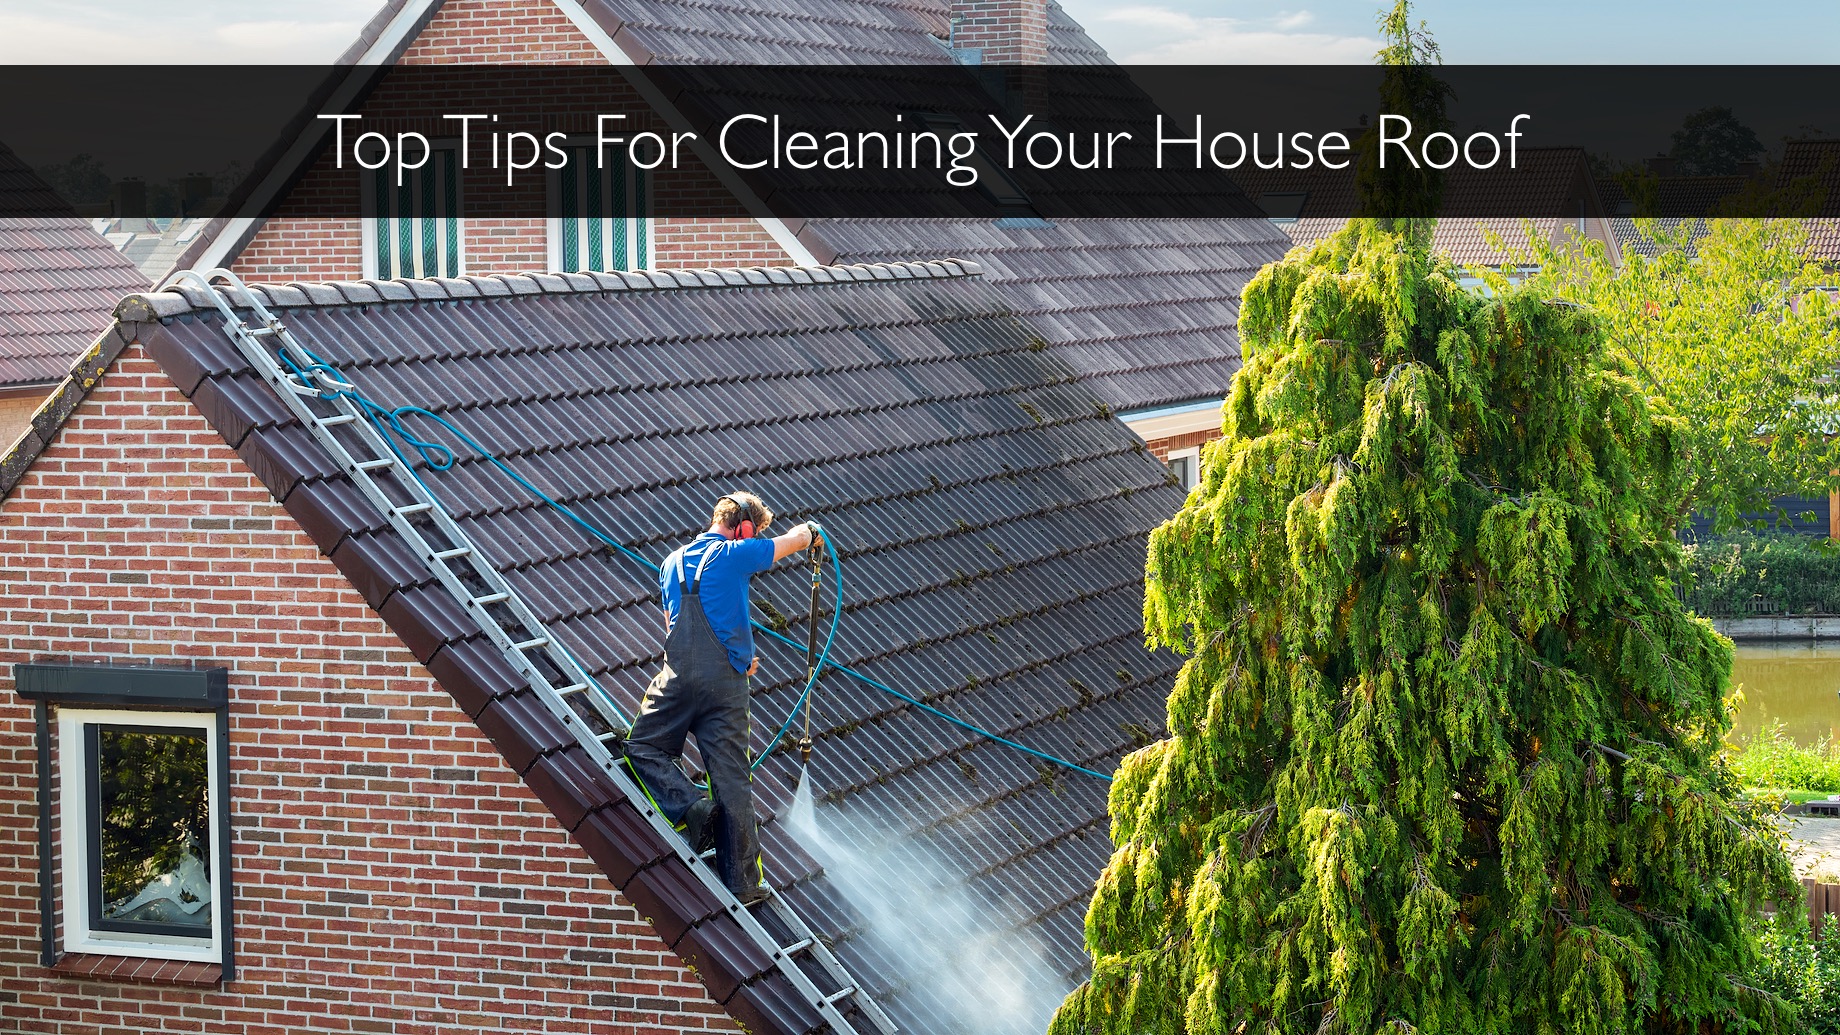 Top Tips For Cleaning Your House Roof